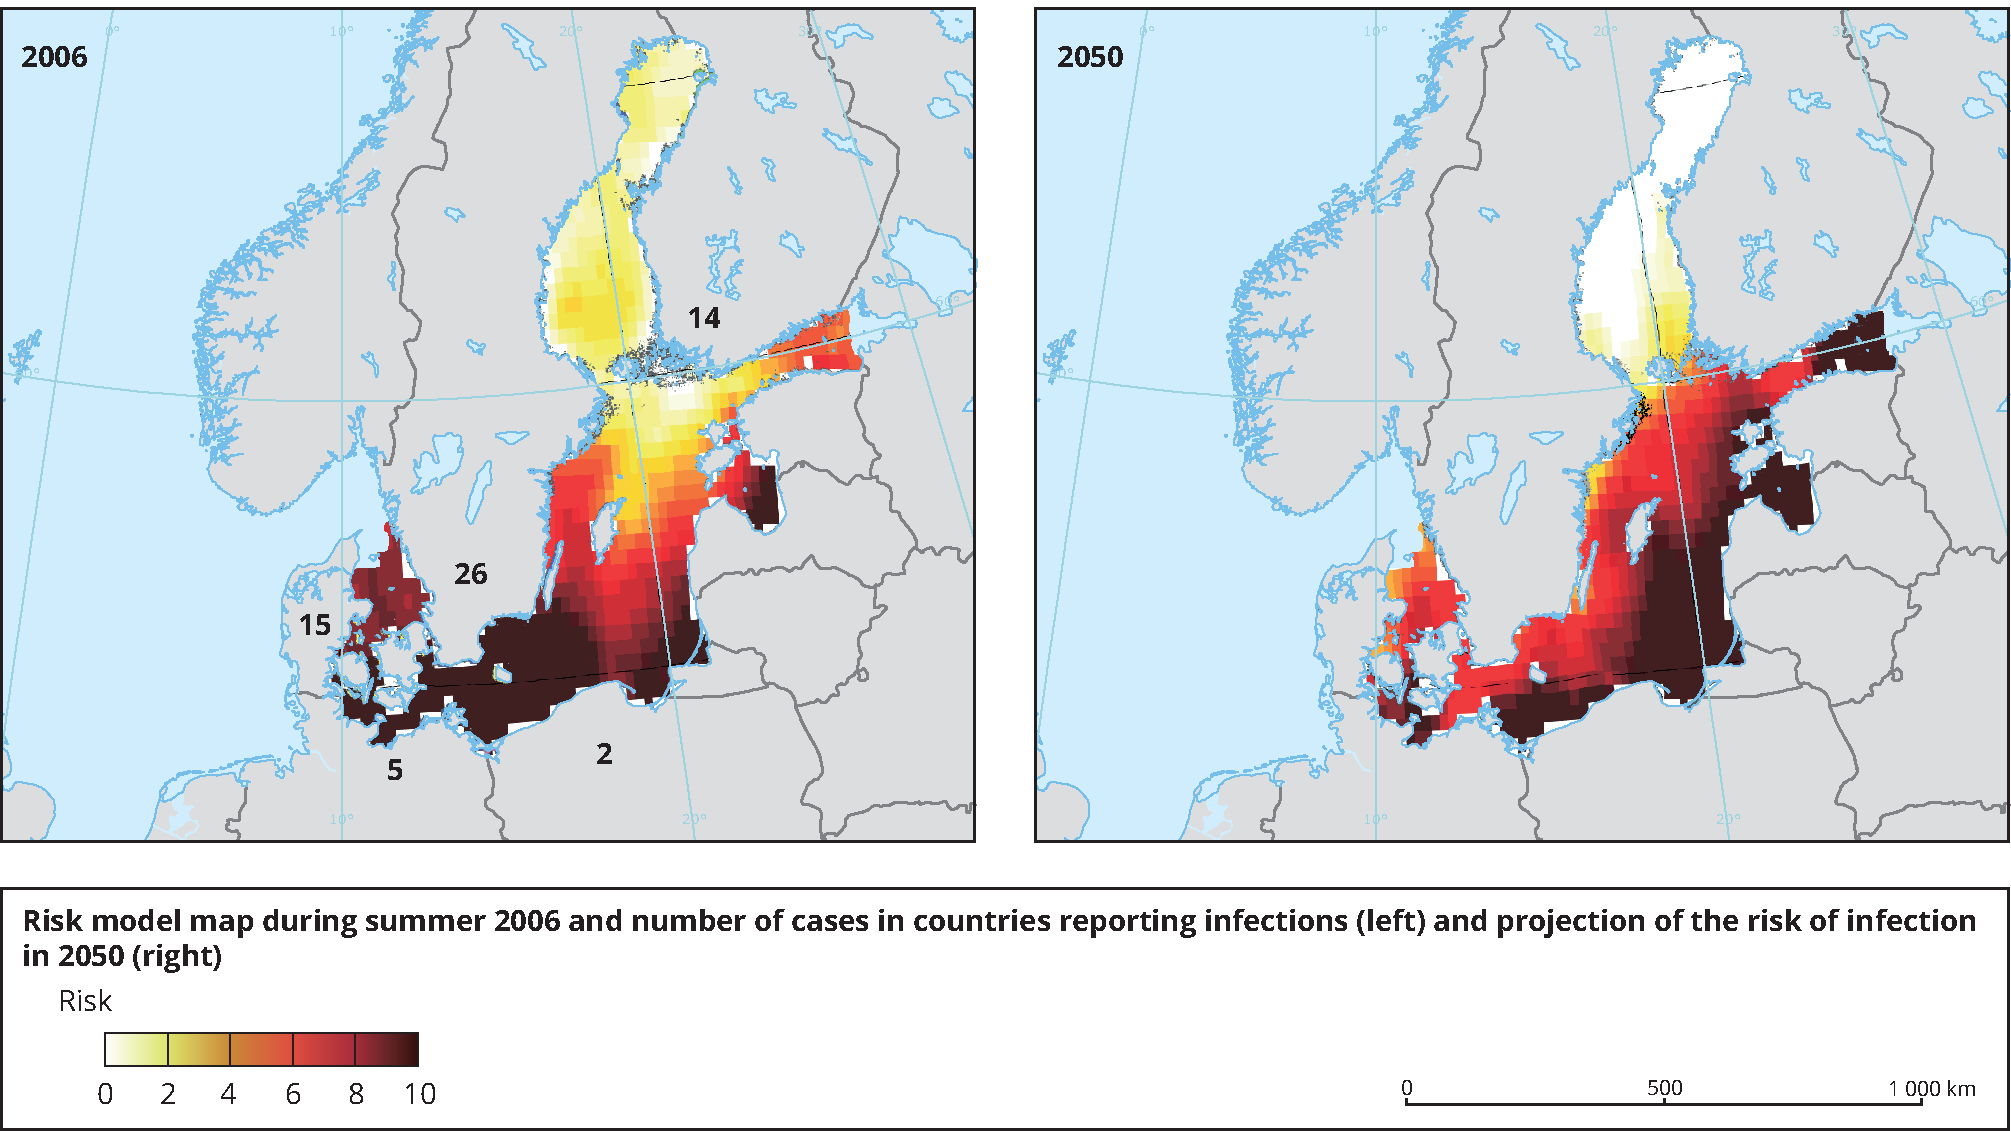 Current and projected risk of vibriosis infections in the Baltic Sea region